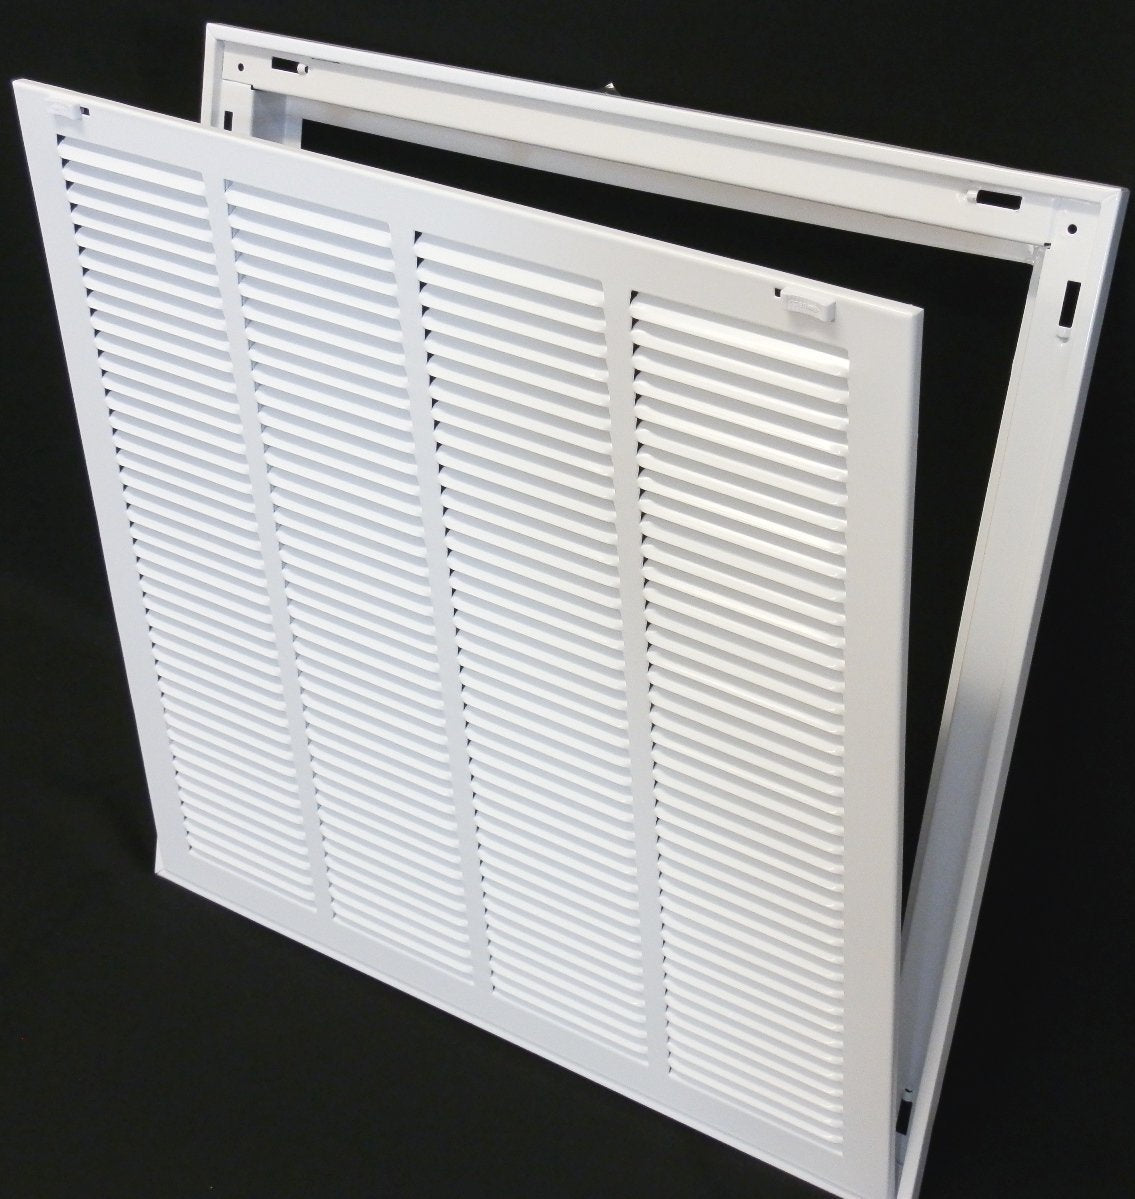 30&quot; X 36&quot; Steel Return Air Filter Grille for 1&quot; Filter - Removable Frame - [Outer Dimensions: 32 5/8&quot; X 38 5/8&quot;]